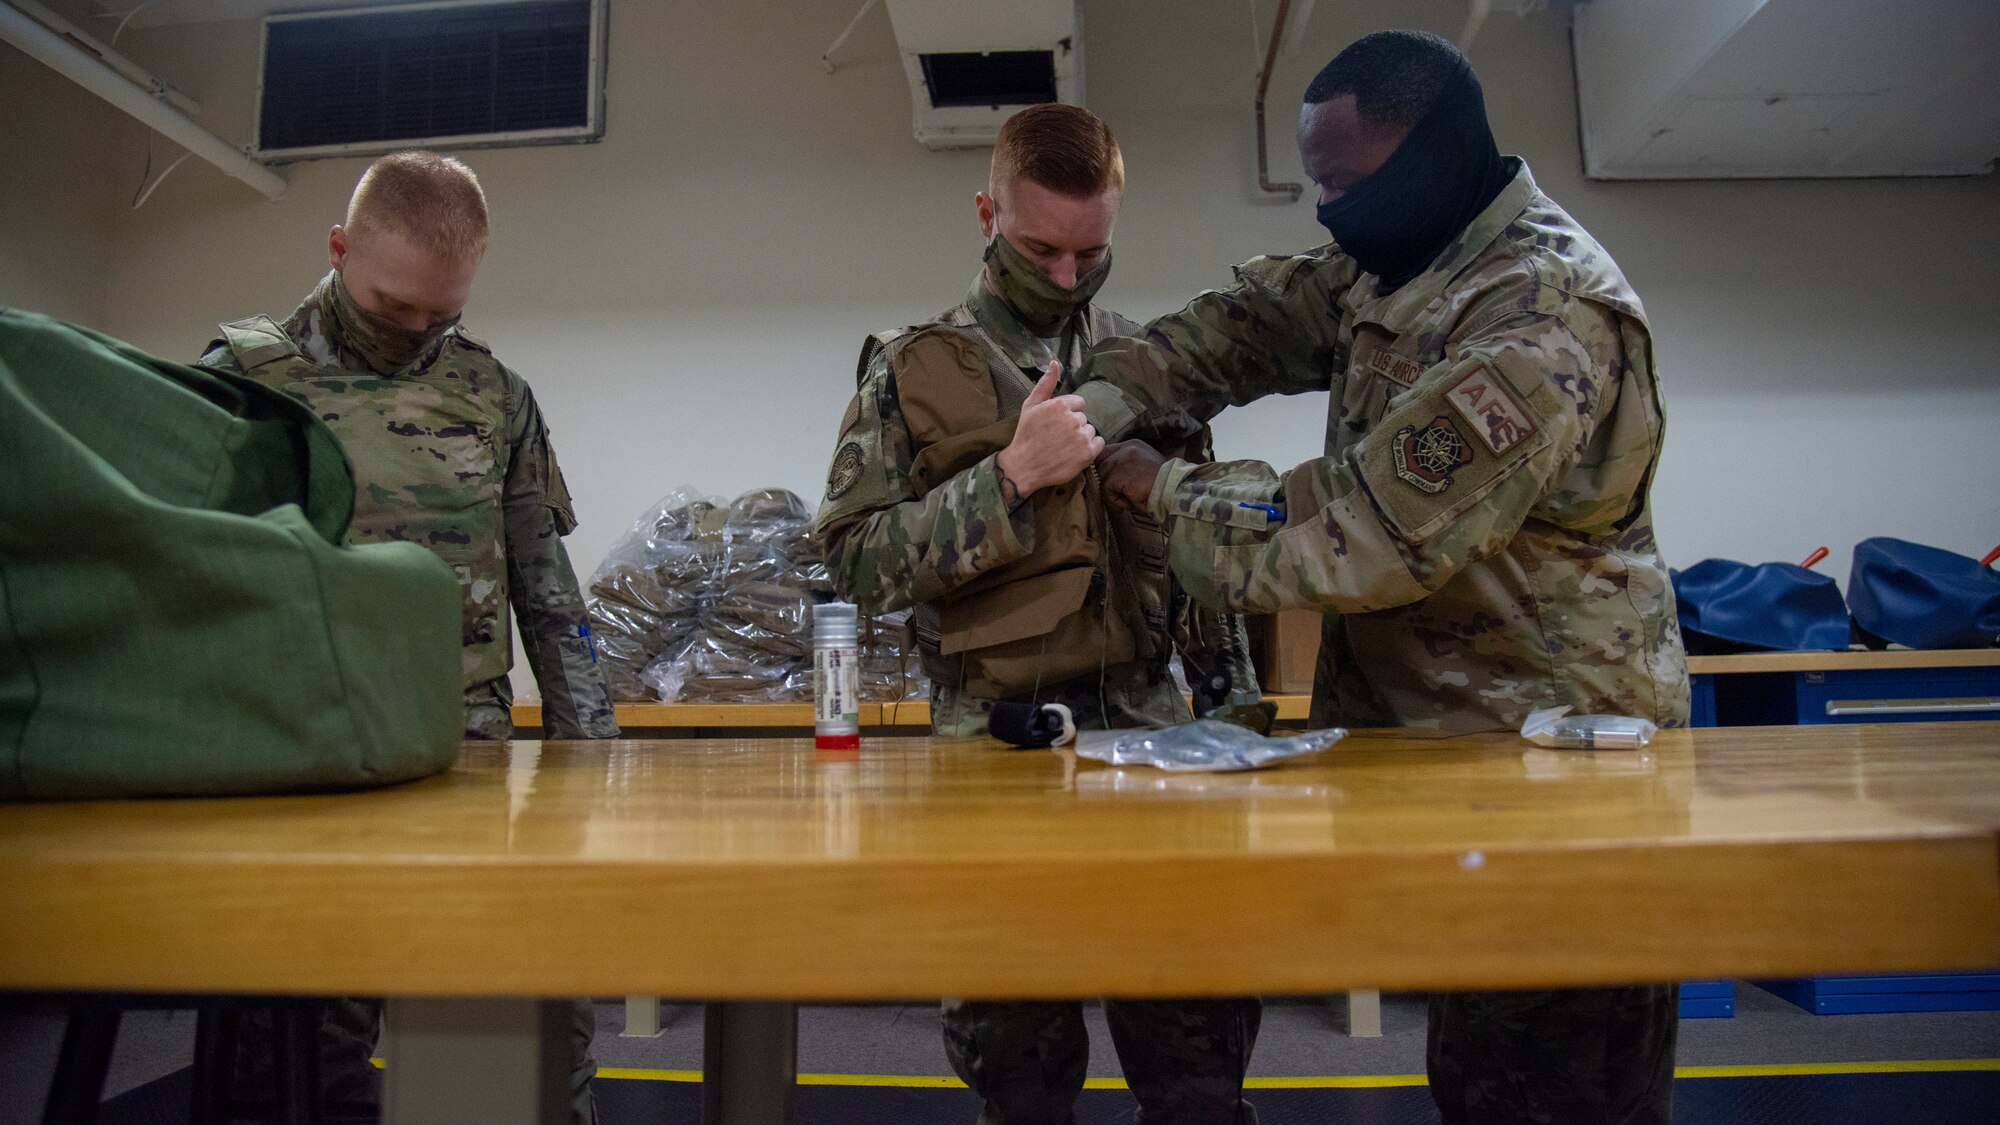 U.S. Air Force Tech. Sgt. Chris Battle, 6th Operations Support Squadron (OSS) Aircrew Flight Equipment (AFE) NCO in charge of aircraft operations (right) inspects a vest worn by Airman 1st Class Daunte Morrison, 6th OSS AFE journeyman (middle) while Airman Nikolai Wroblewski, 6th OSS AFE apprentice (left) waits for his vest inspection at MacDill Air Force Base, Florida, April 14, 2021. 6th OSS AFE members must be fully trained on lifesaving equipment and survival components as well as keep air crews trained and proficient on the use of such equipment.